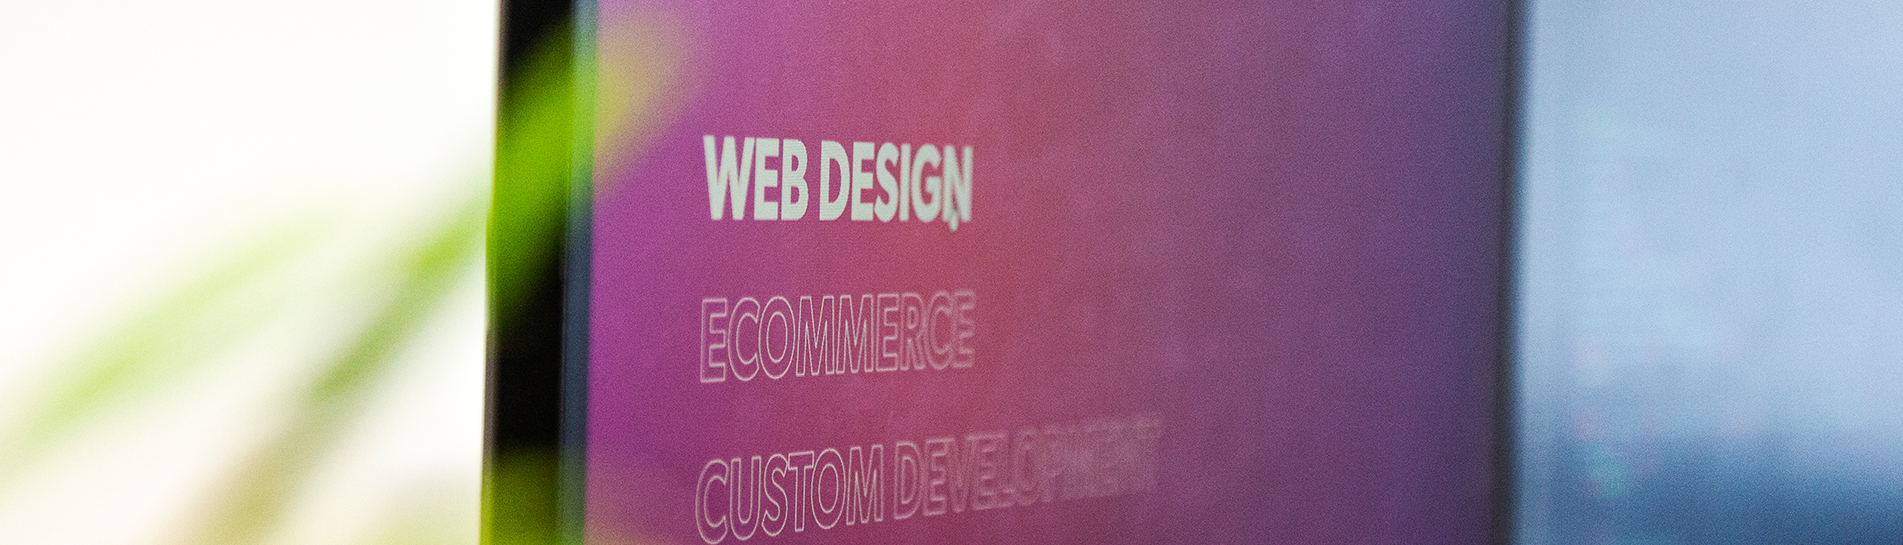 computer screen showing gloversure digital services